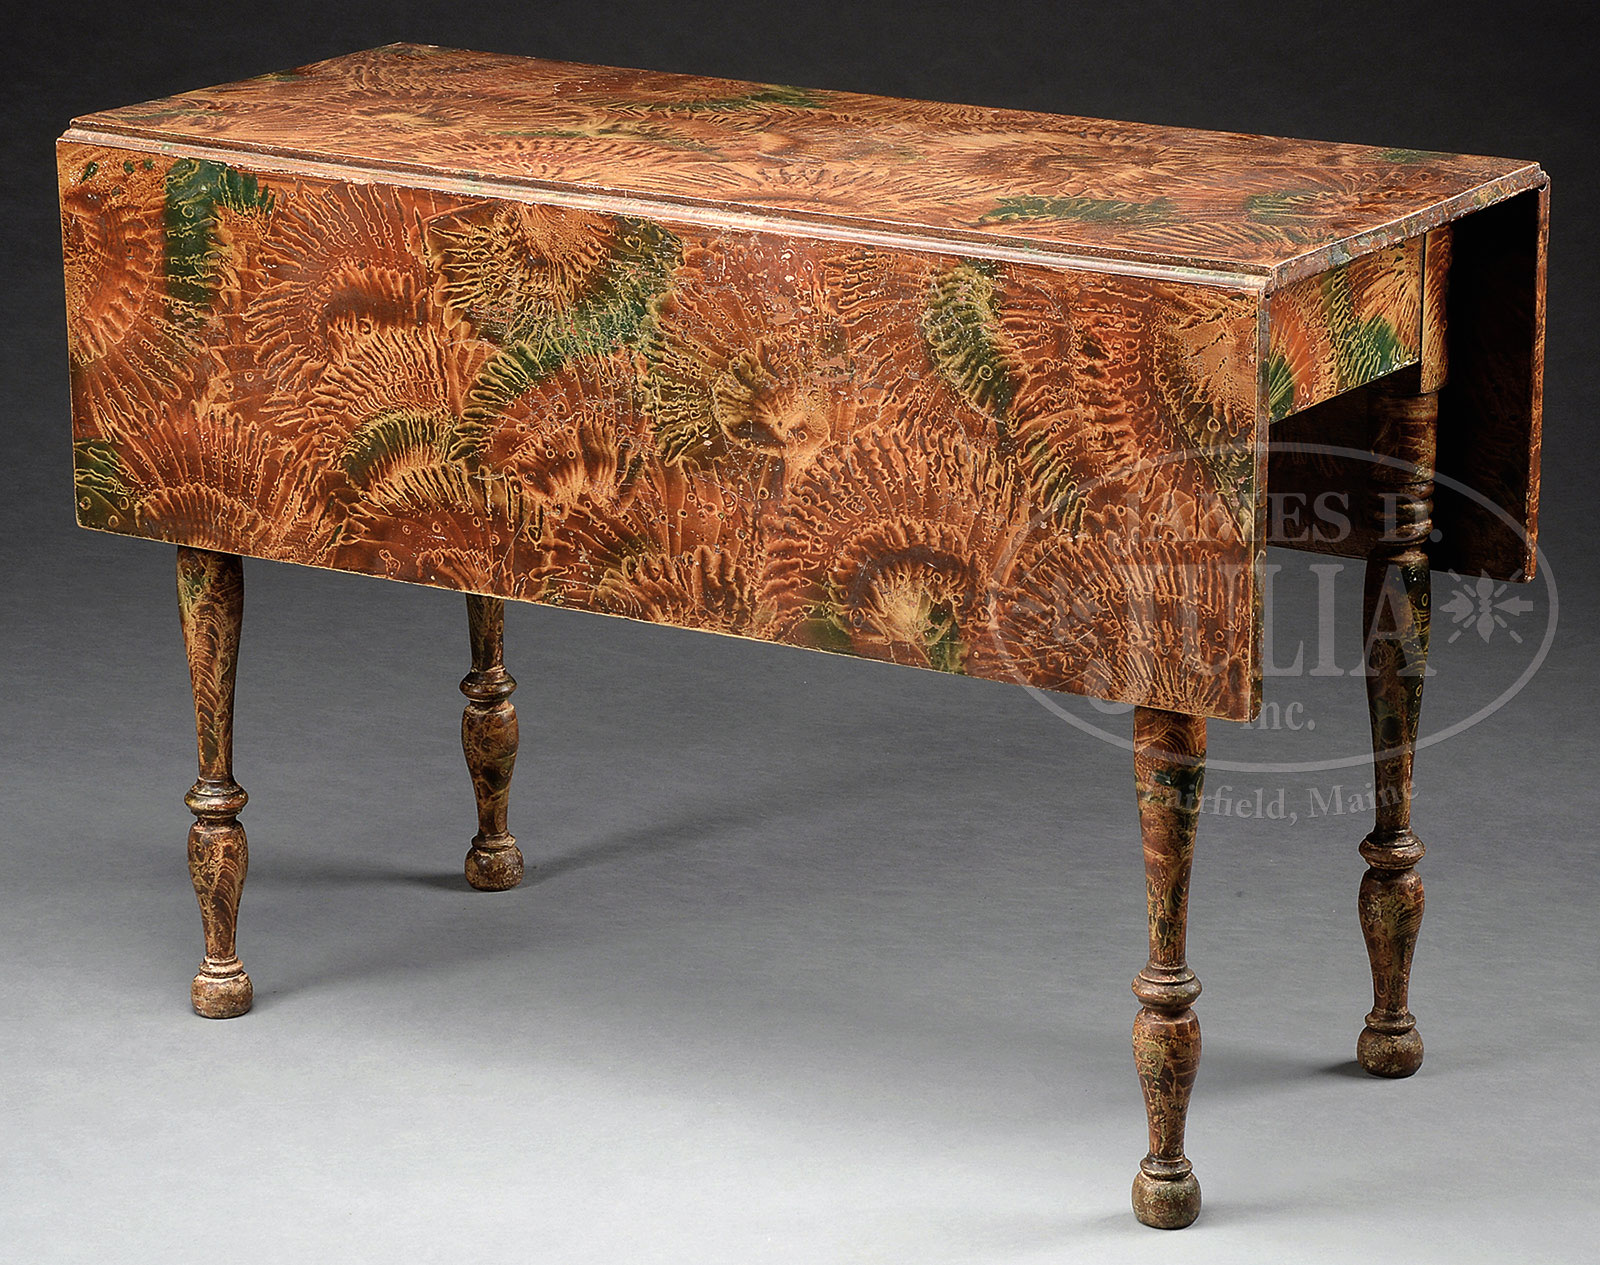 SPECTACULAR AND RARE VINEGAR PAINT DECORATED DROP-LEAF TABLE.